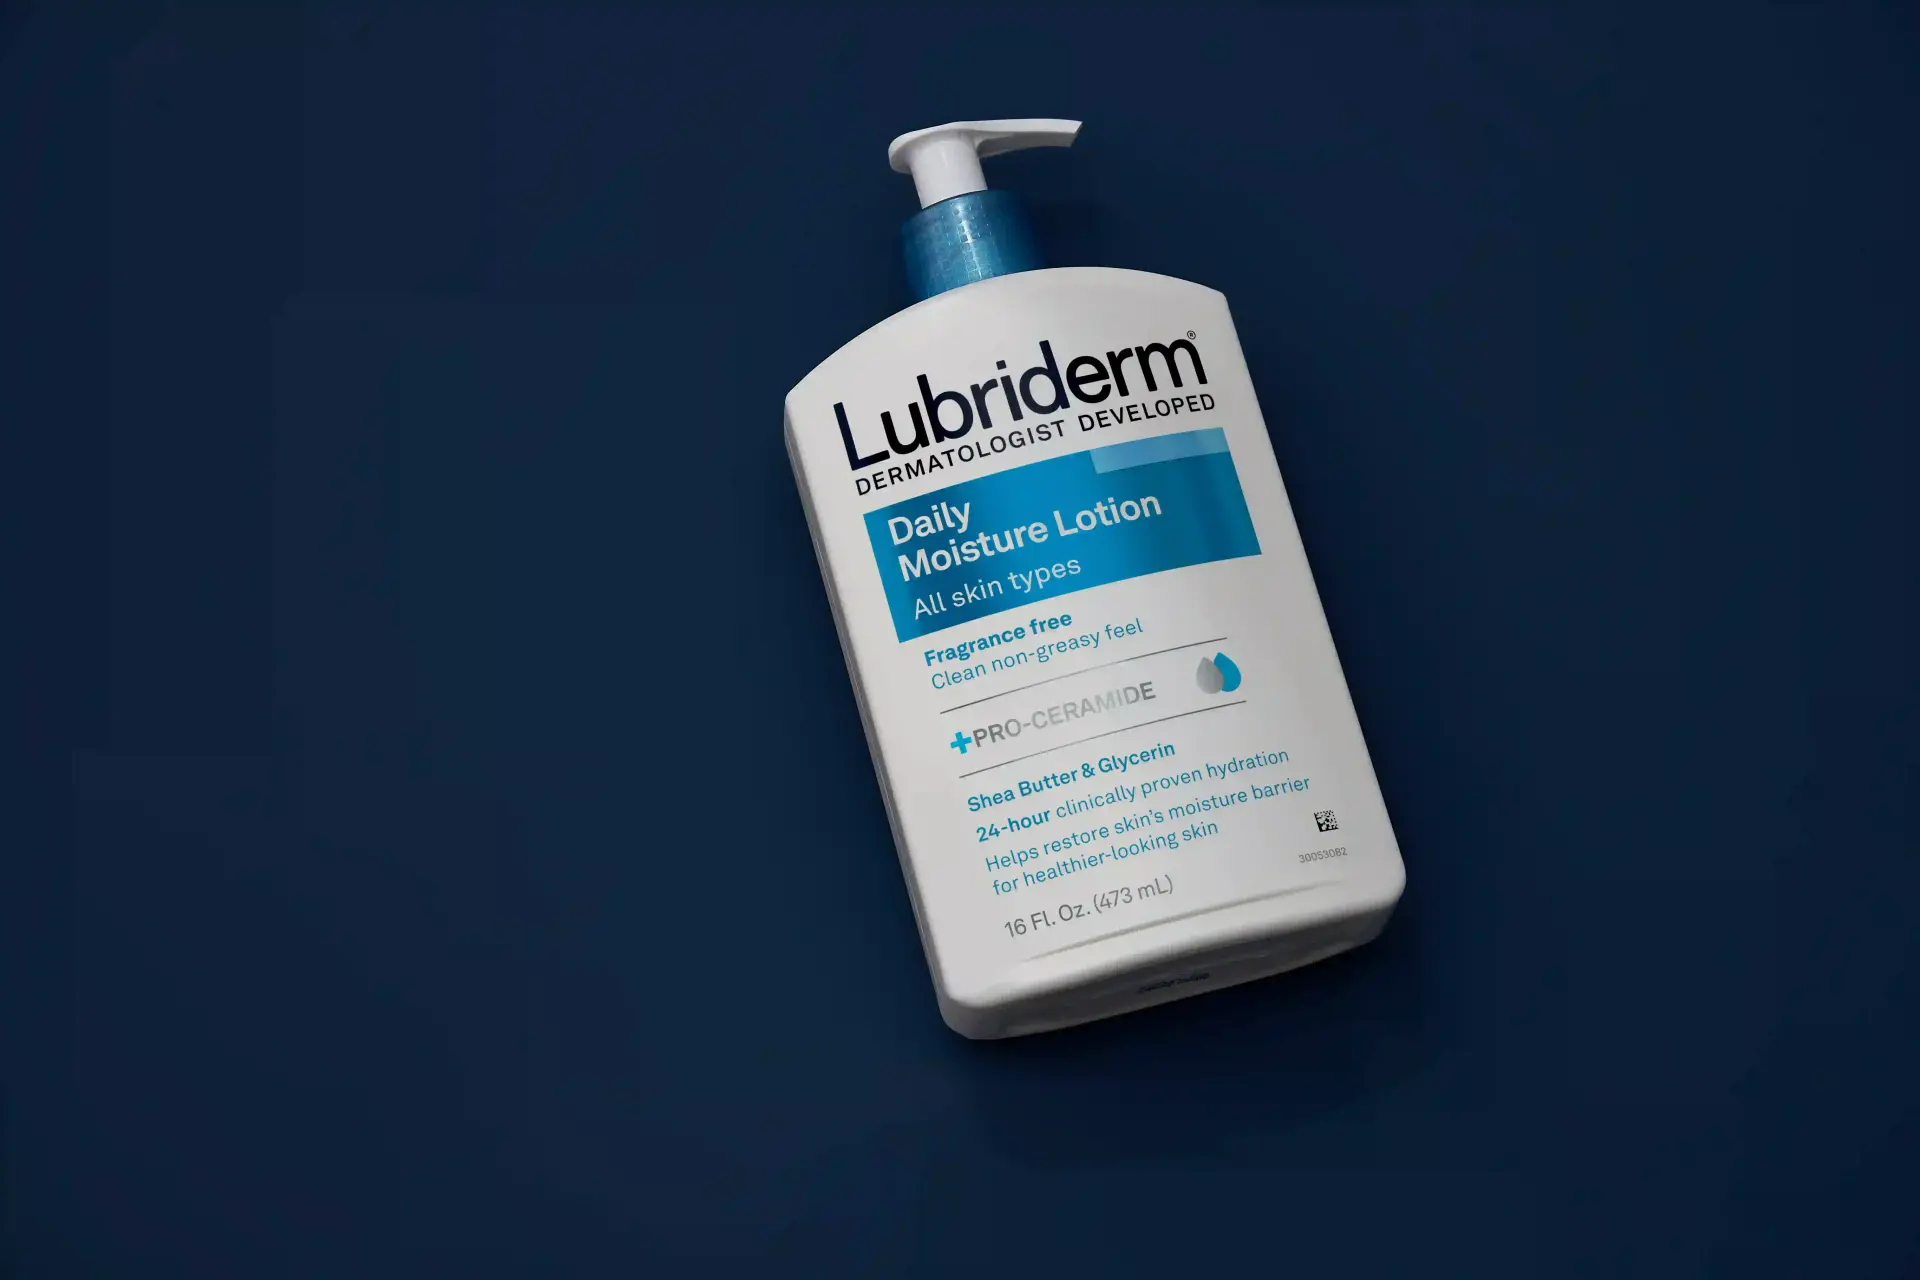 Lubriderm(R) Daily Moisture products on blue background